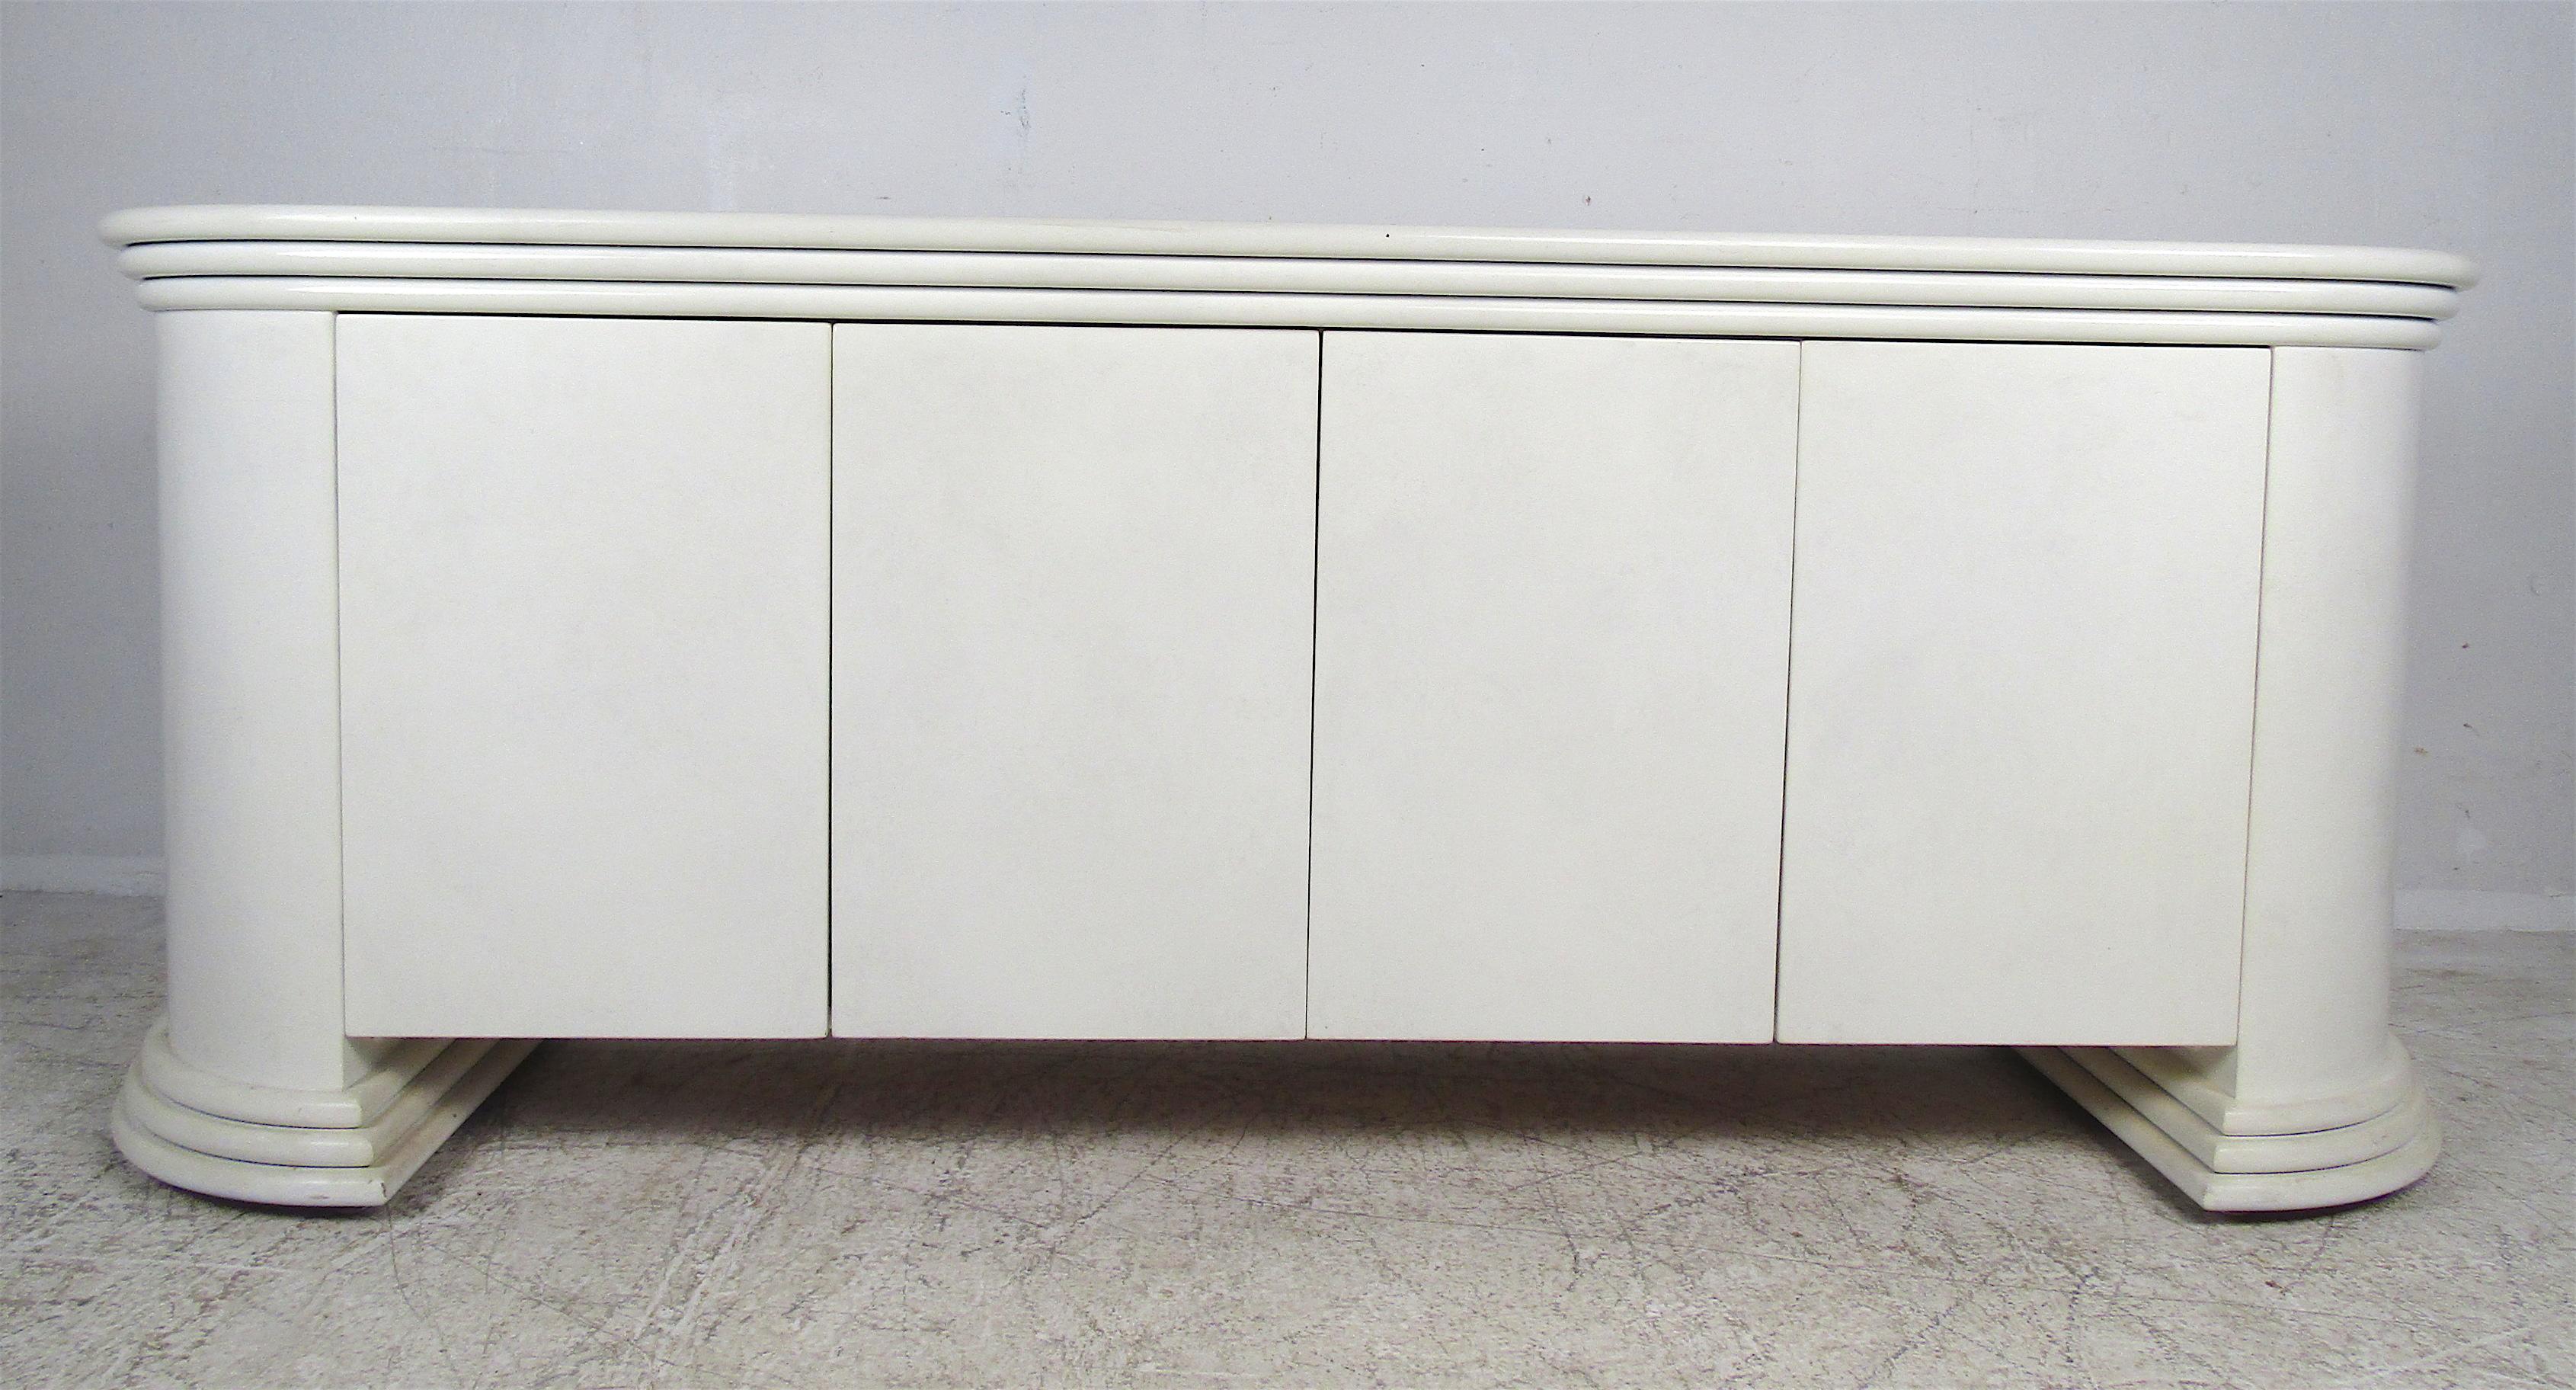 This remarkable vintage modern sideboard features plenty of room for storage. A lovely Karl Springer style lacquered casing with a decorative base and top edges. Four swinging cabinet doors open up to unveil plenty of space for storage with shelves